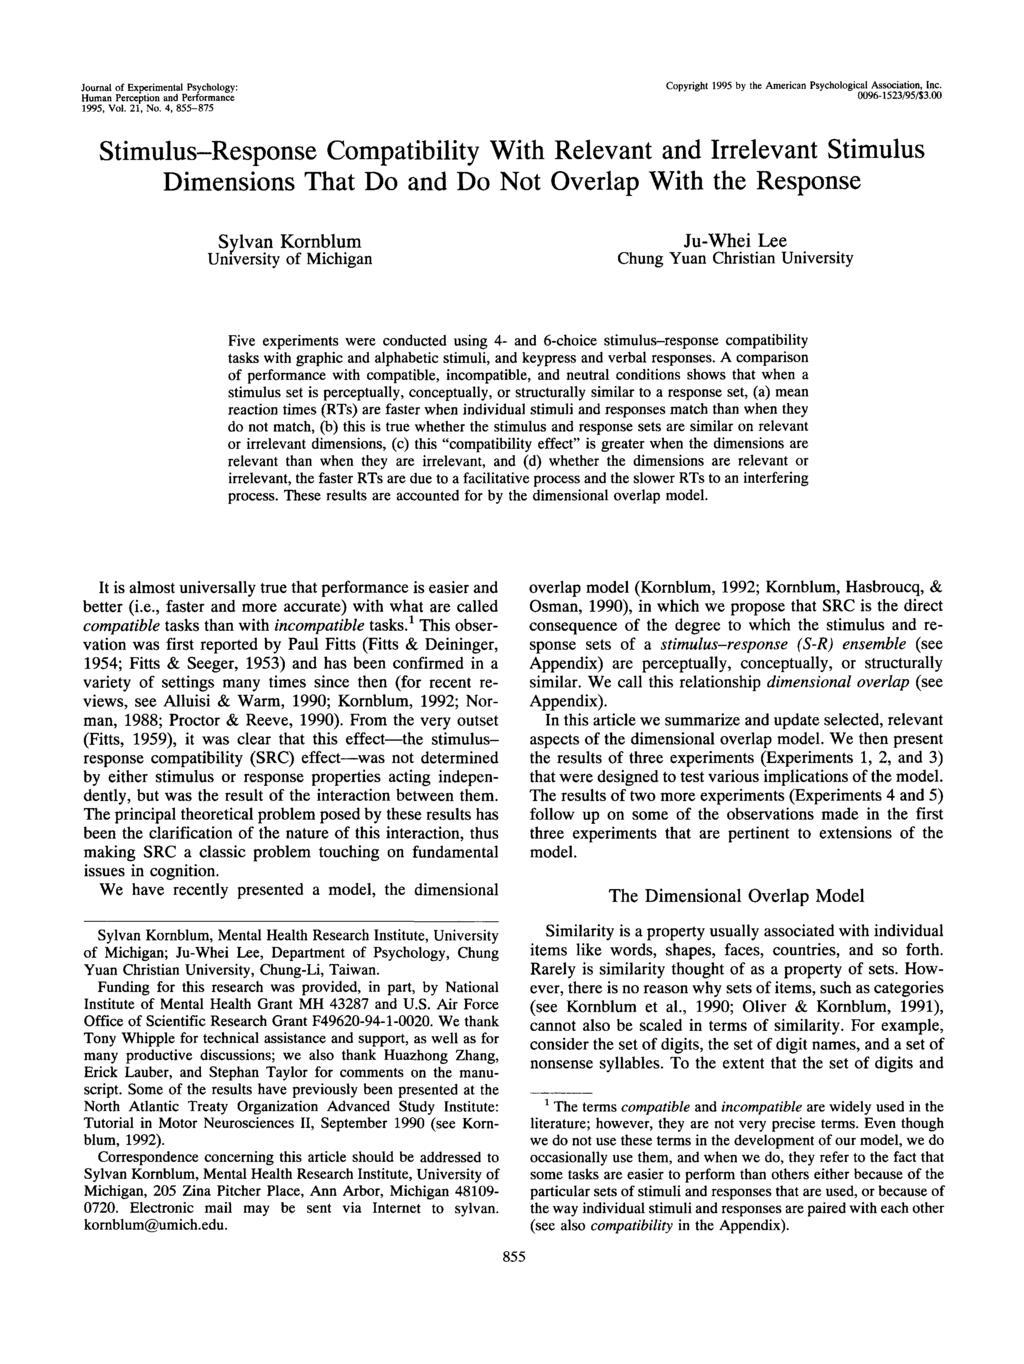 Journal of Experimental Psychology: Human Perception and Performance 1995, Vol. 21, No. 4, 855-875 Copyright 1995 by the American Psychological Association, Inc. 0096-1523/95/S3.